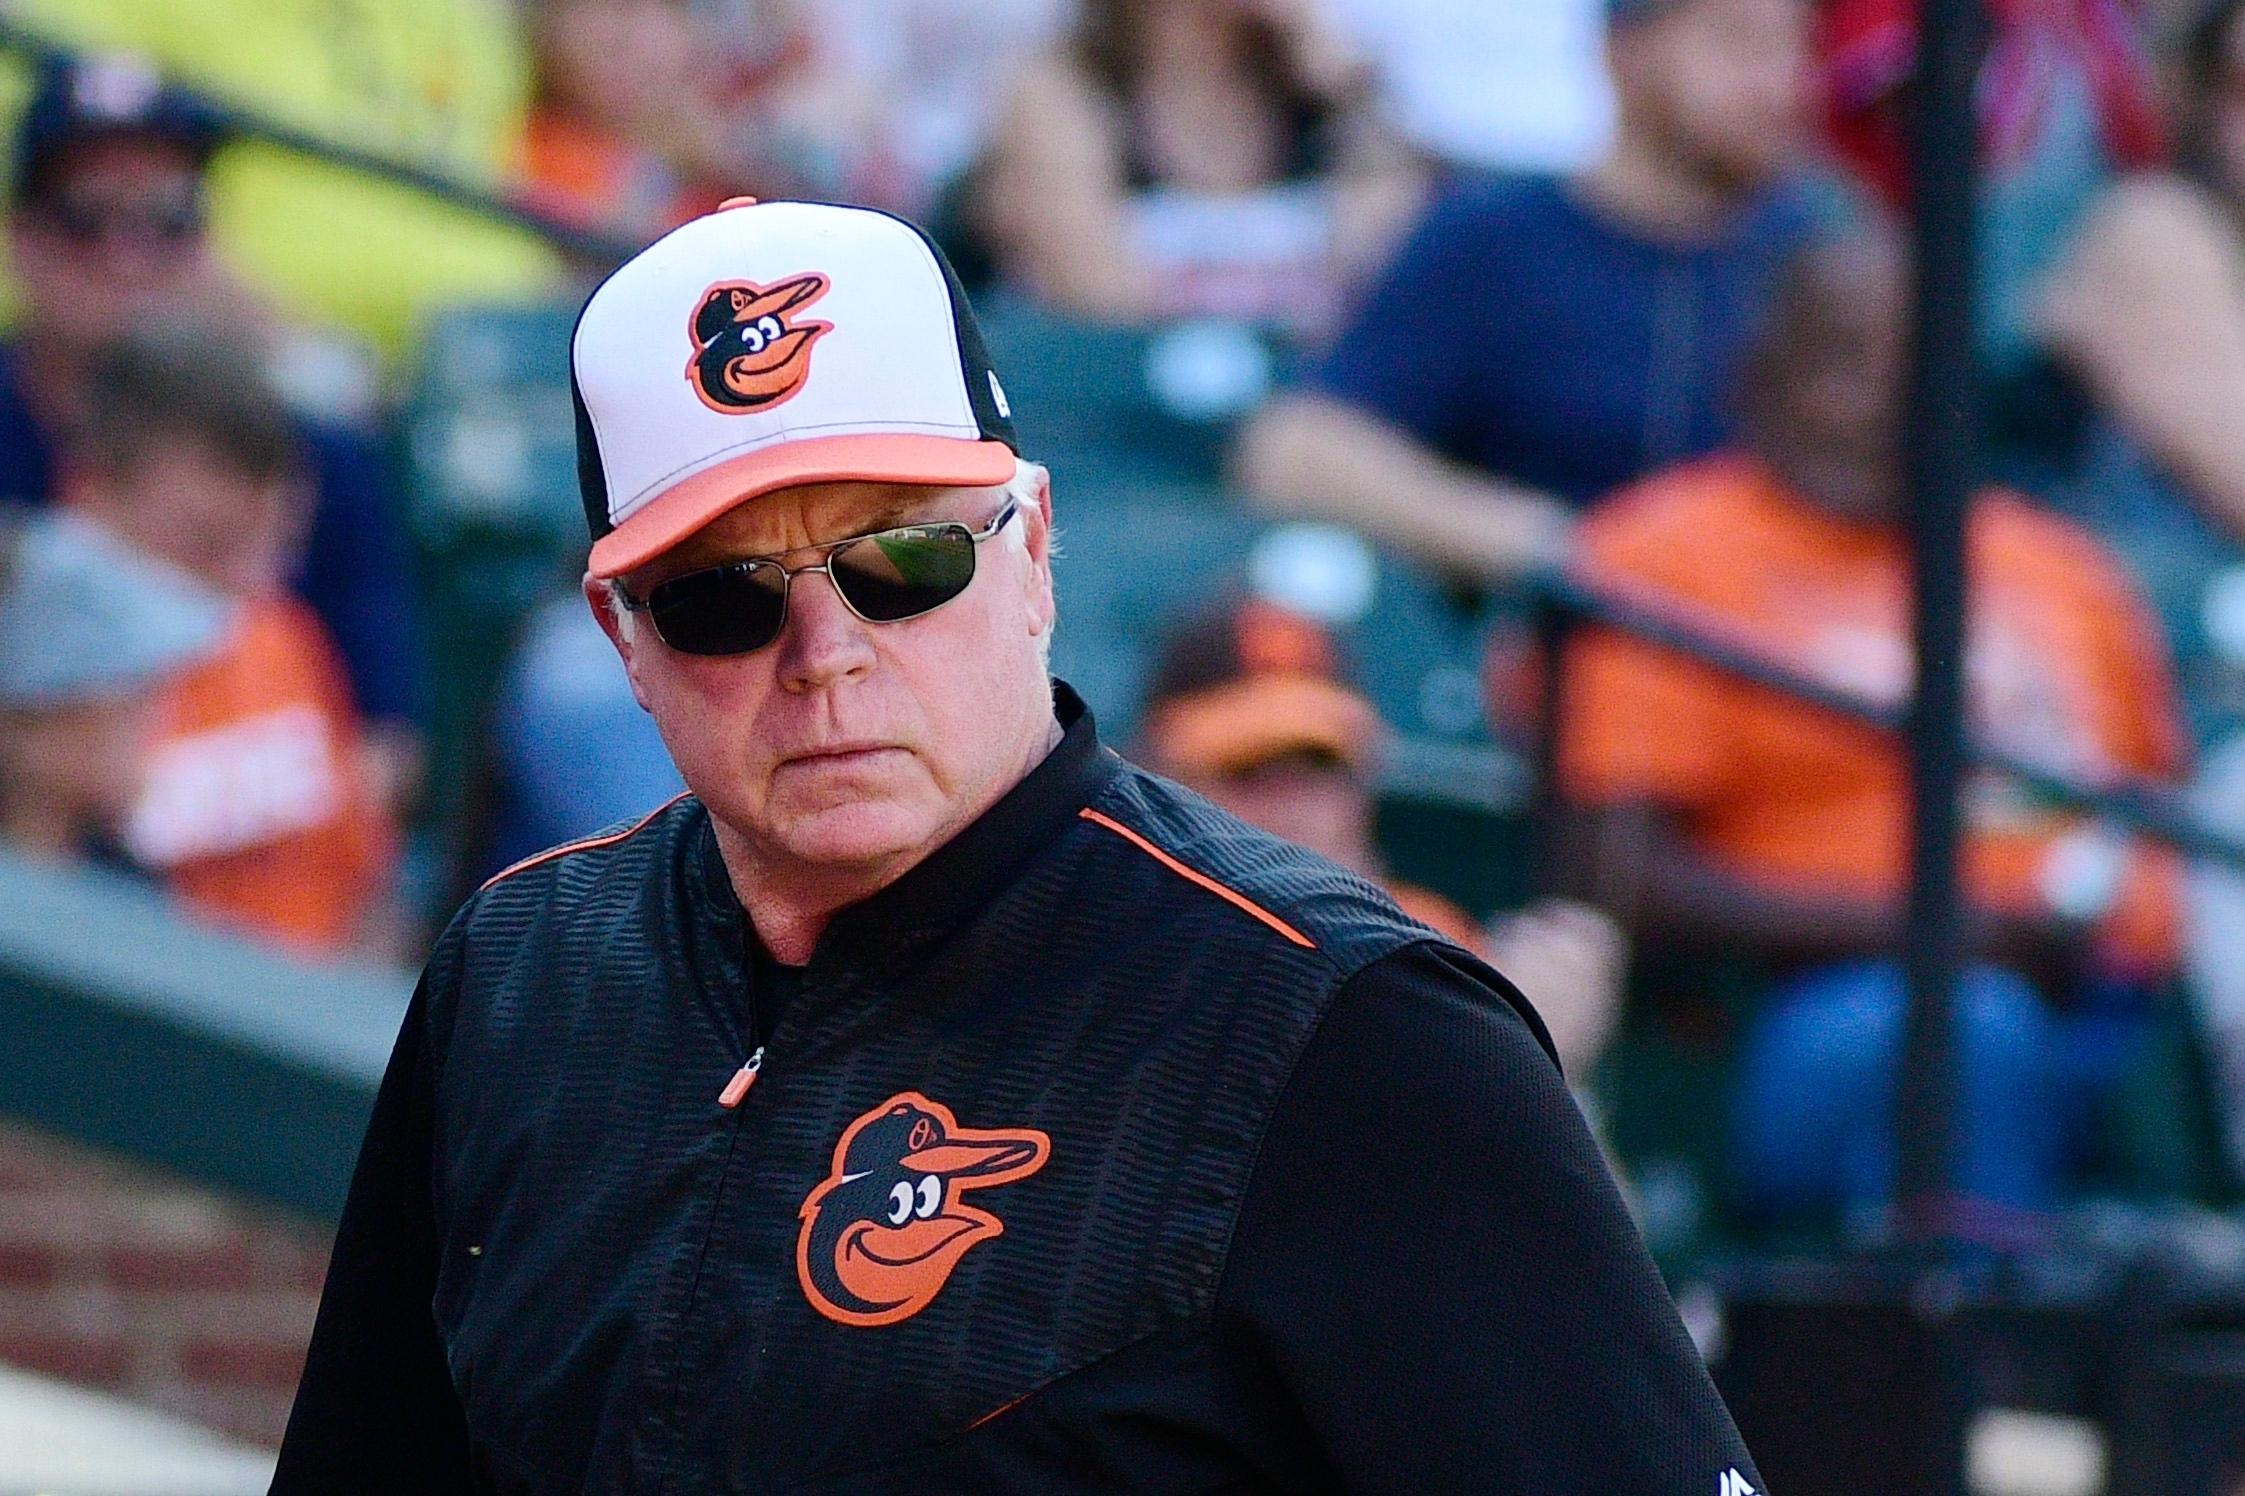 Baltimore Orioles manager Buck Showalter (26) walks off the field after speaking with an umpire in the third inning against the Houston Astros at Oriole Park at Camden Yards. / Tommy Gilligan/USA TODAY